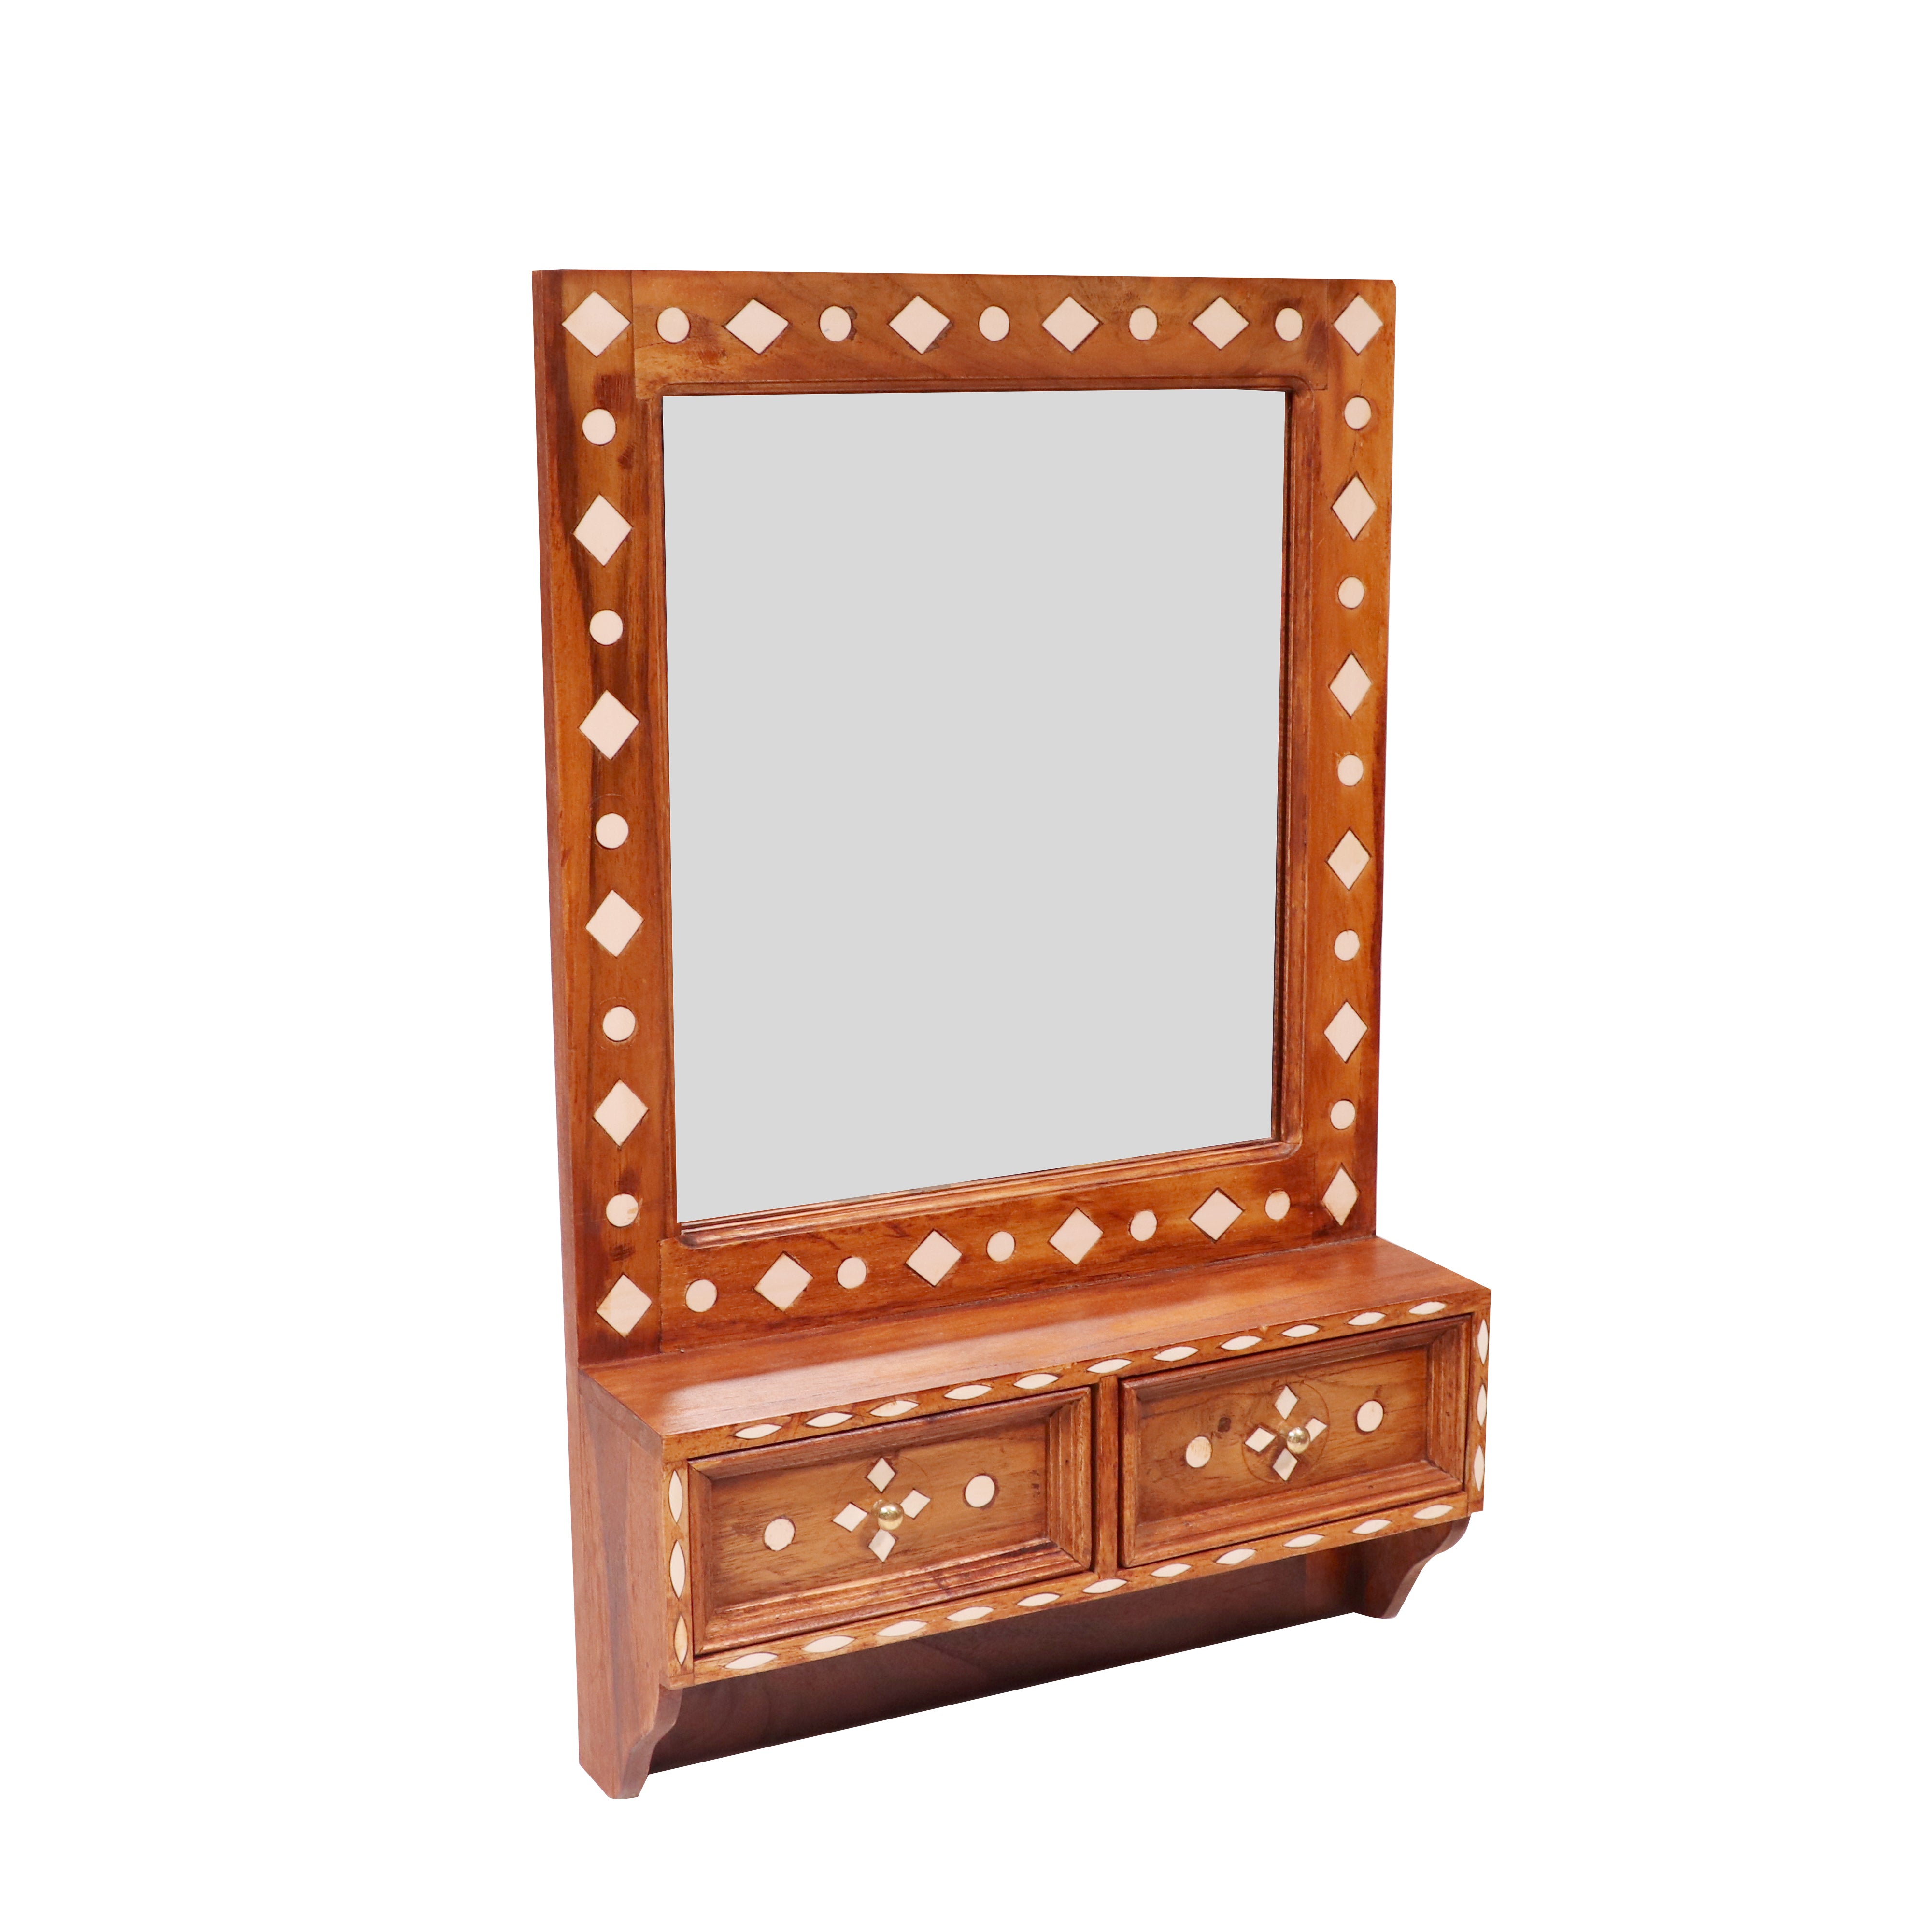 Denver Double Drawer Inlay Designed Wooden Handmade Mirror for Home Mirror